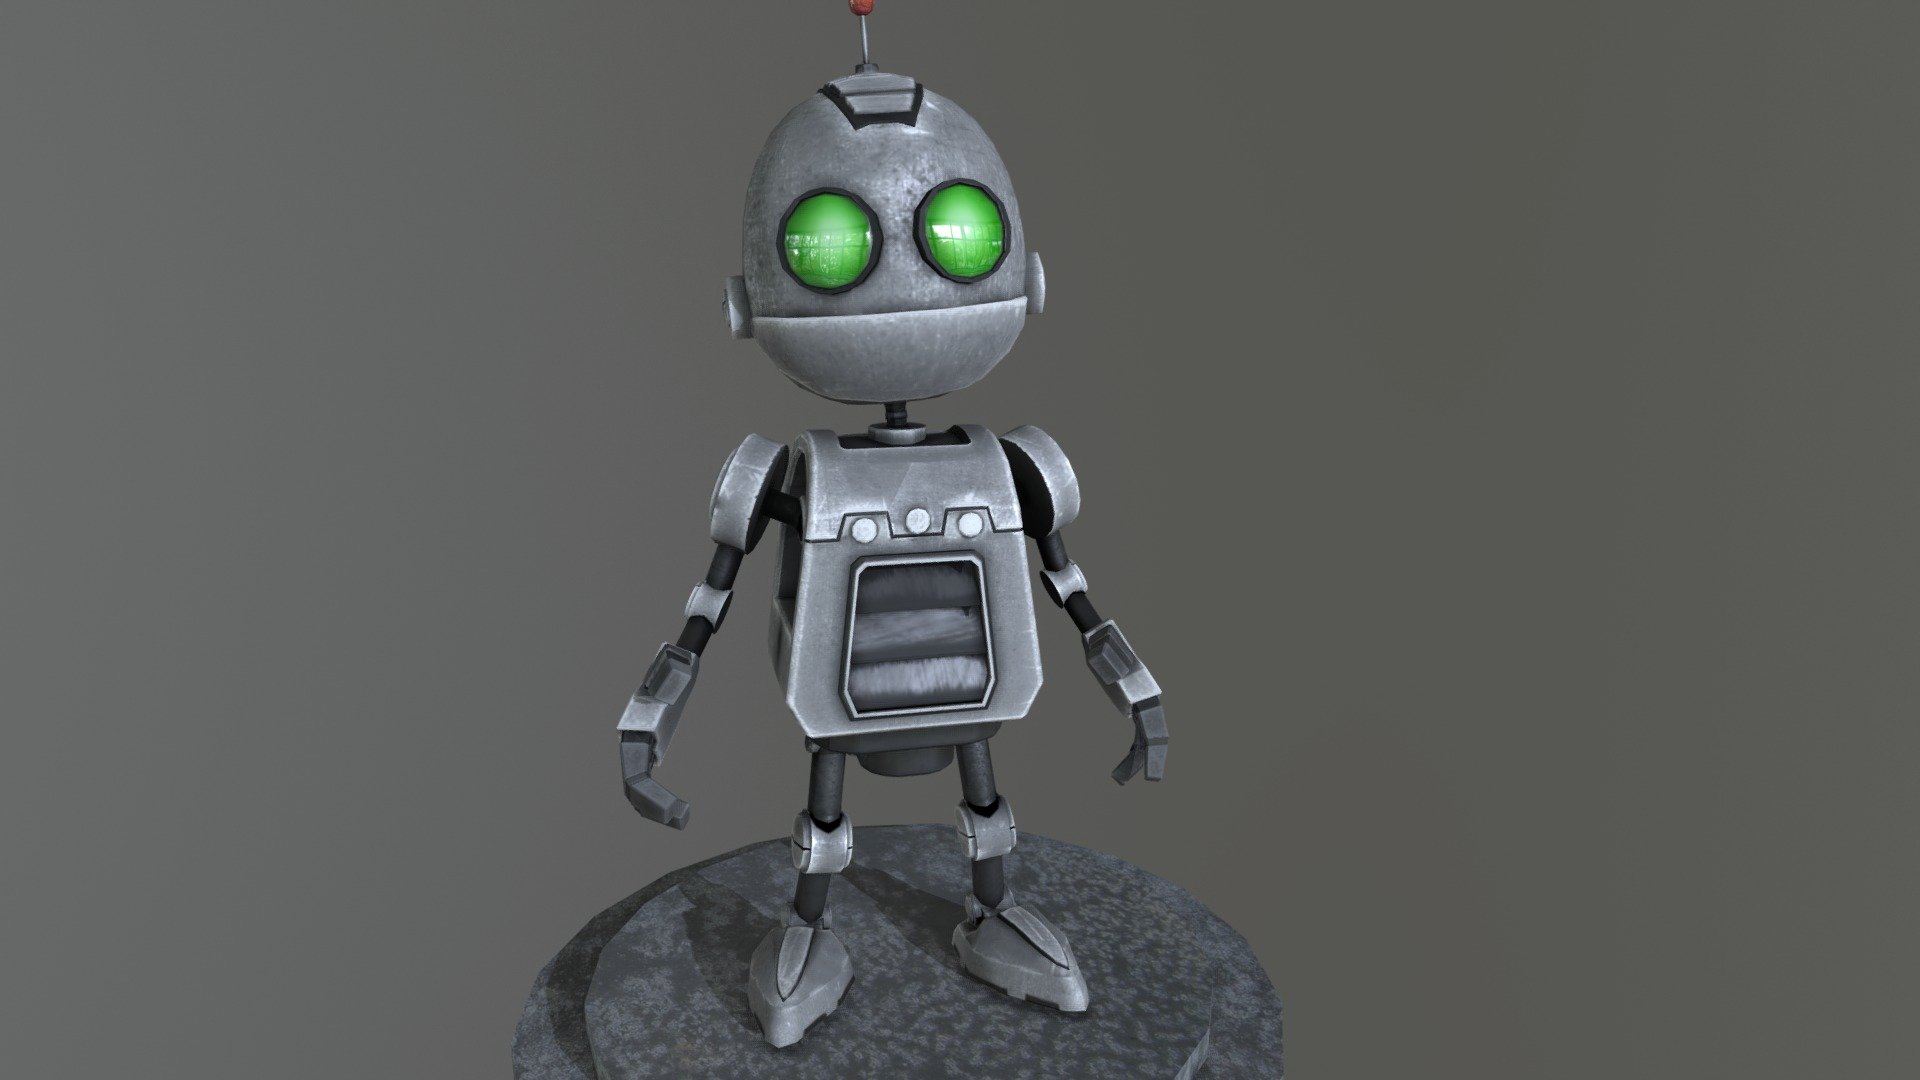 Model created for a second year assignment.

Clank from Ratchet and Clank, modeled and animated.

By Kim Modra, 2nd year game artist and animator at AIE 3d model